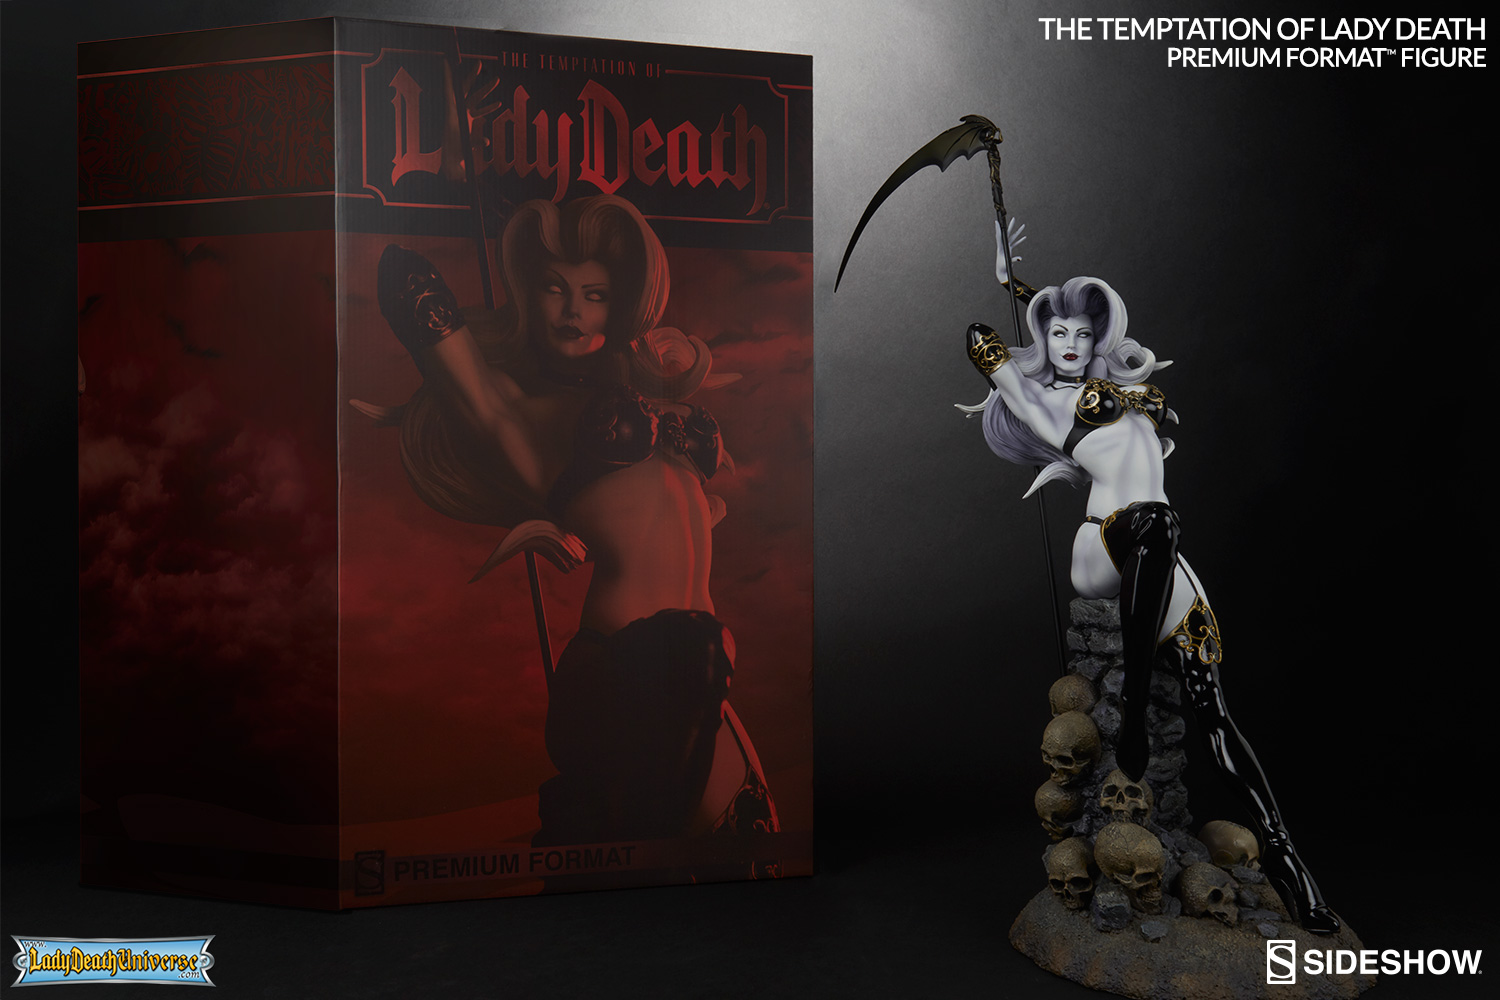 https://www.sideshowtoy.com/assets/products/300344-the-temptation-of-lady-death/lg/the-temptation-of-lady-death-premium-format-300344-14.jpg